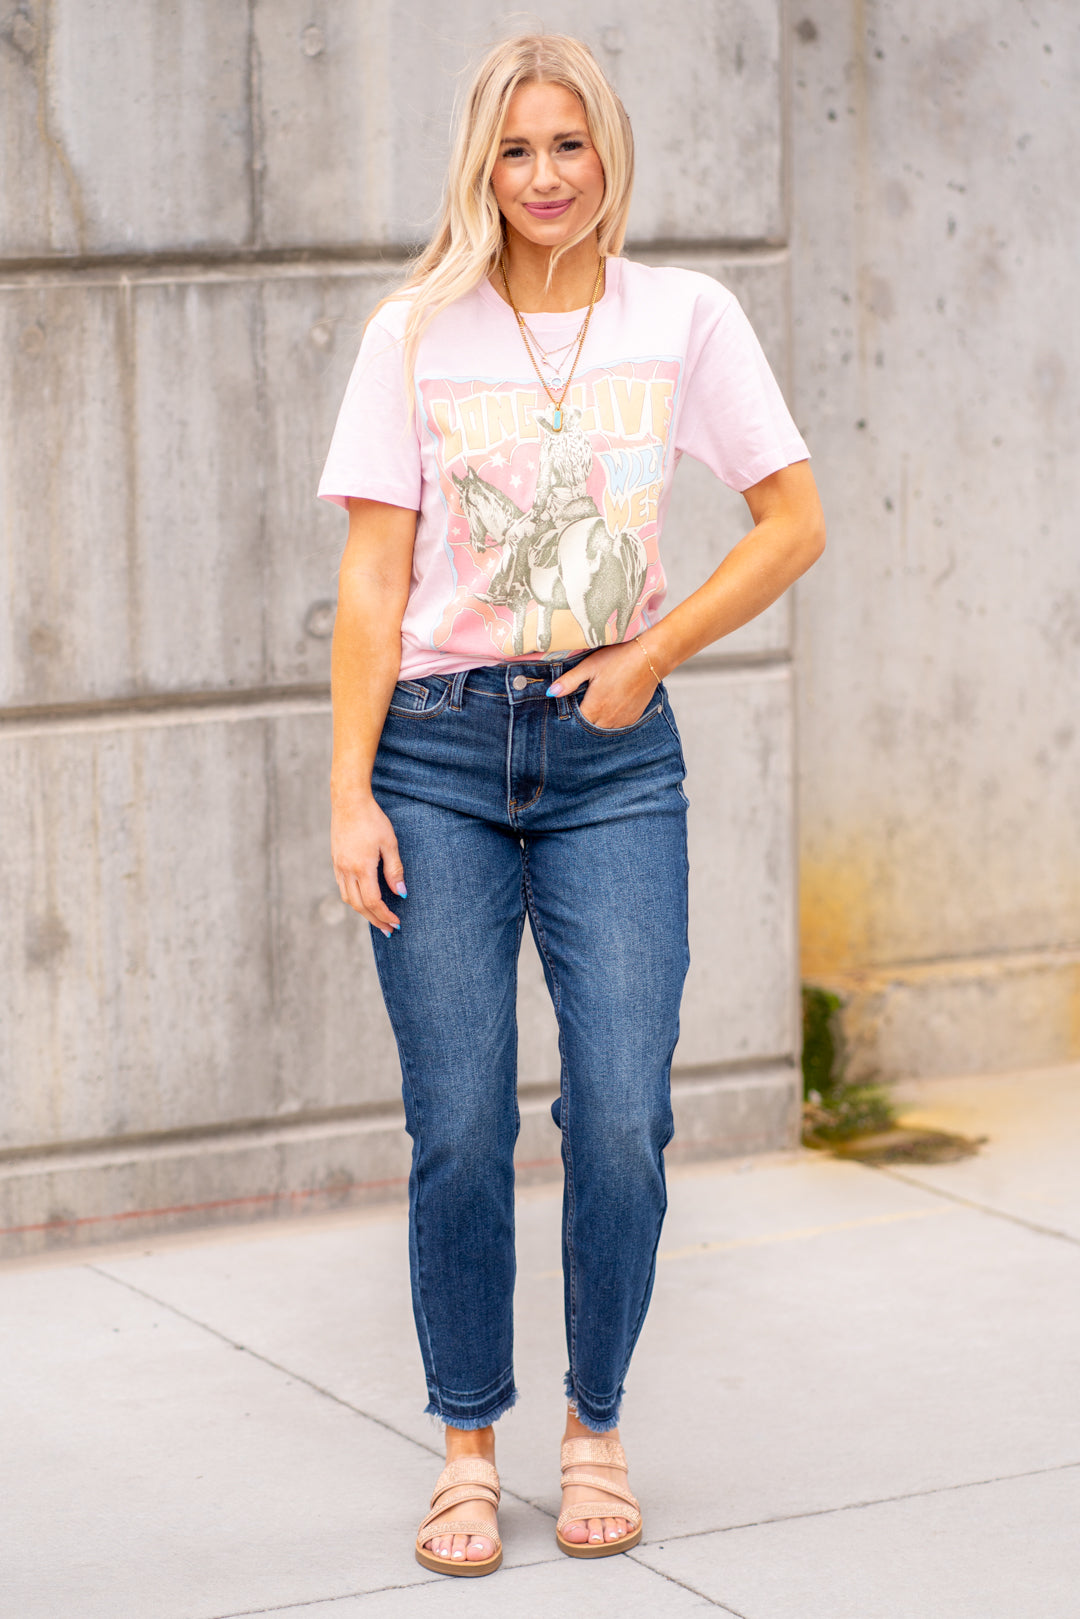 Judy Blue In The City Jeans, By Alexa Rae Boutique